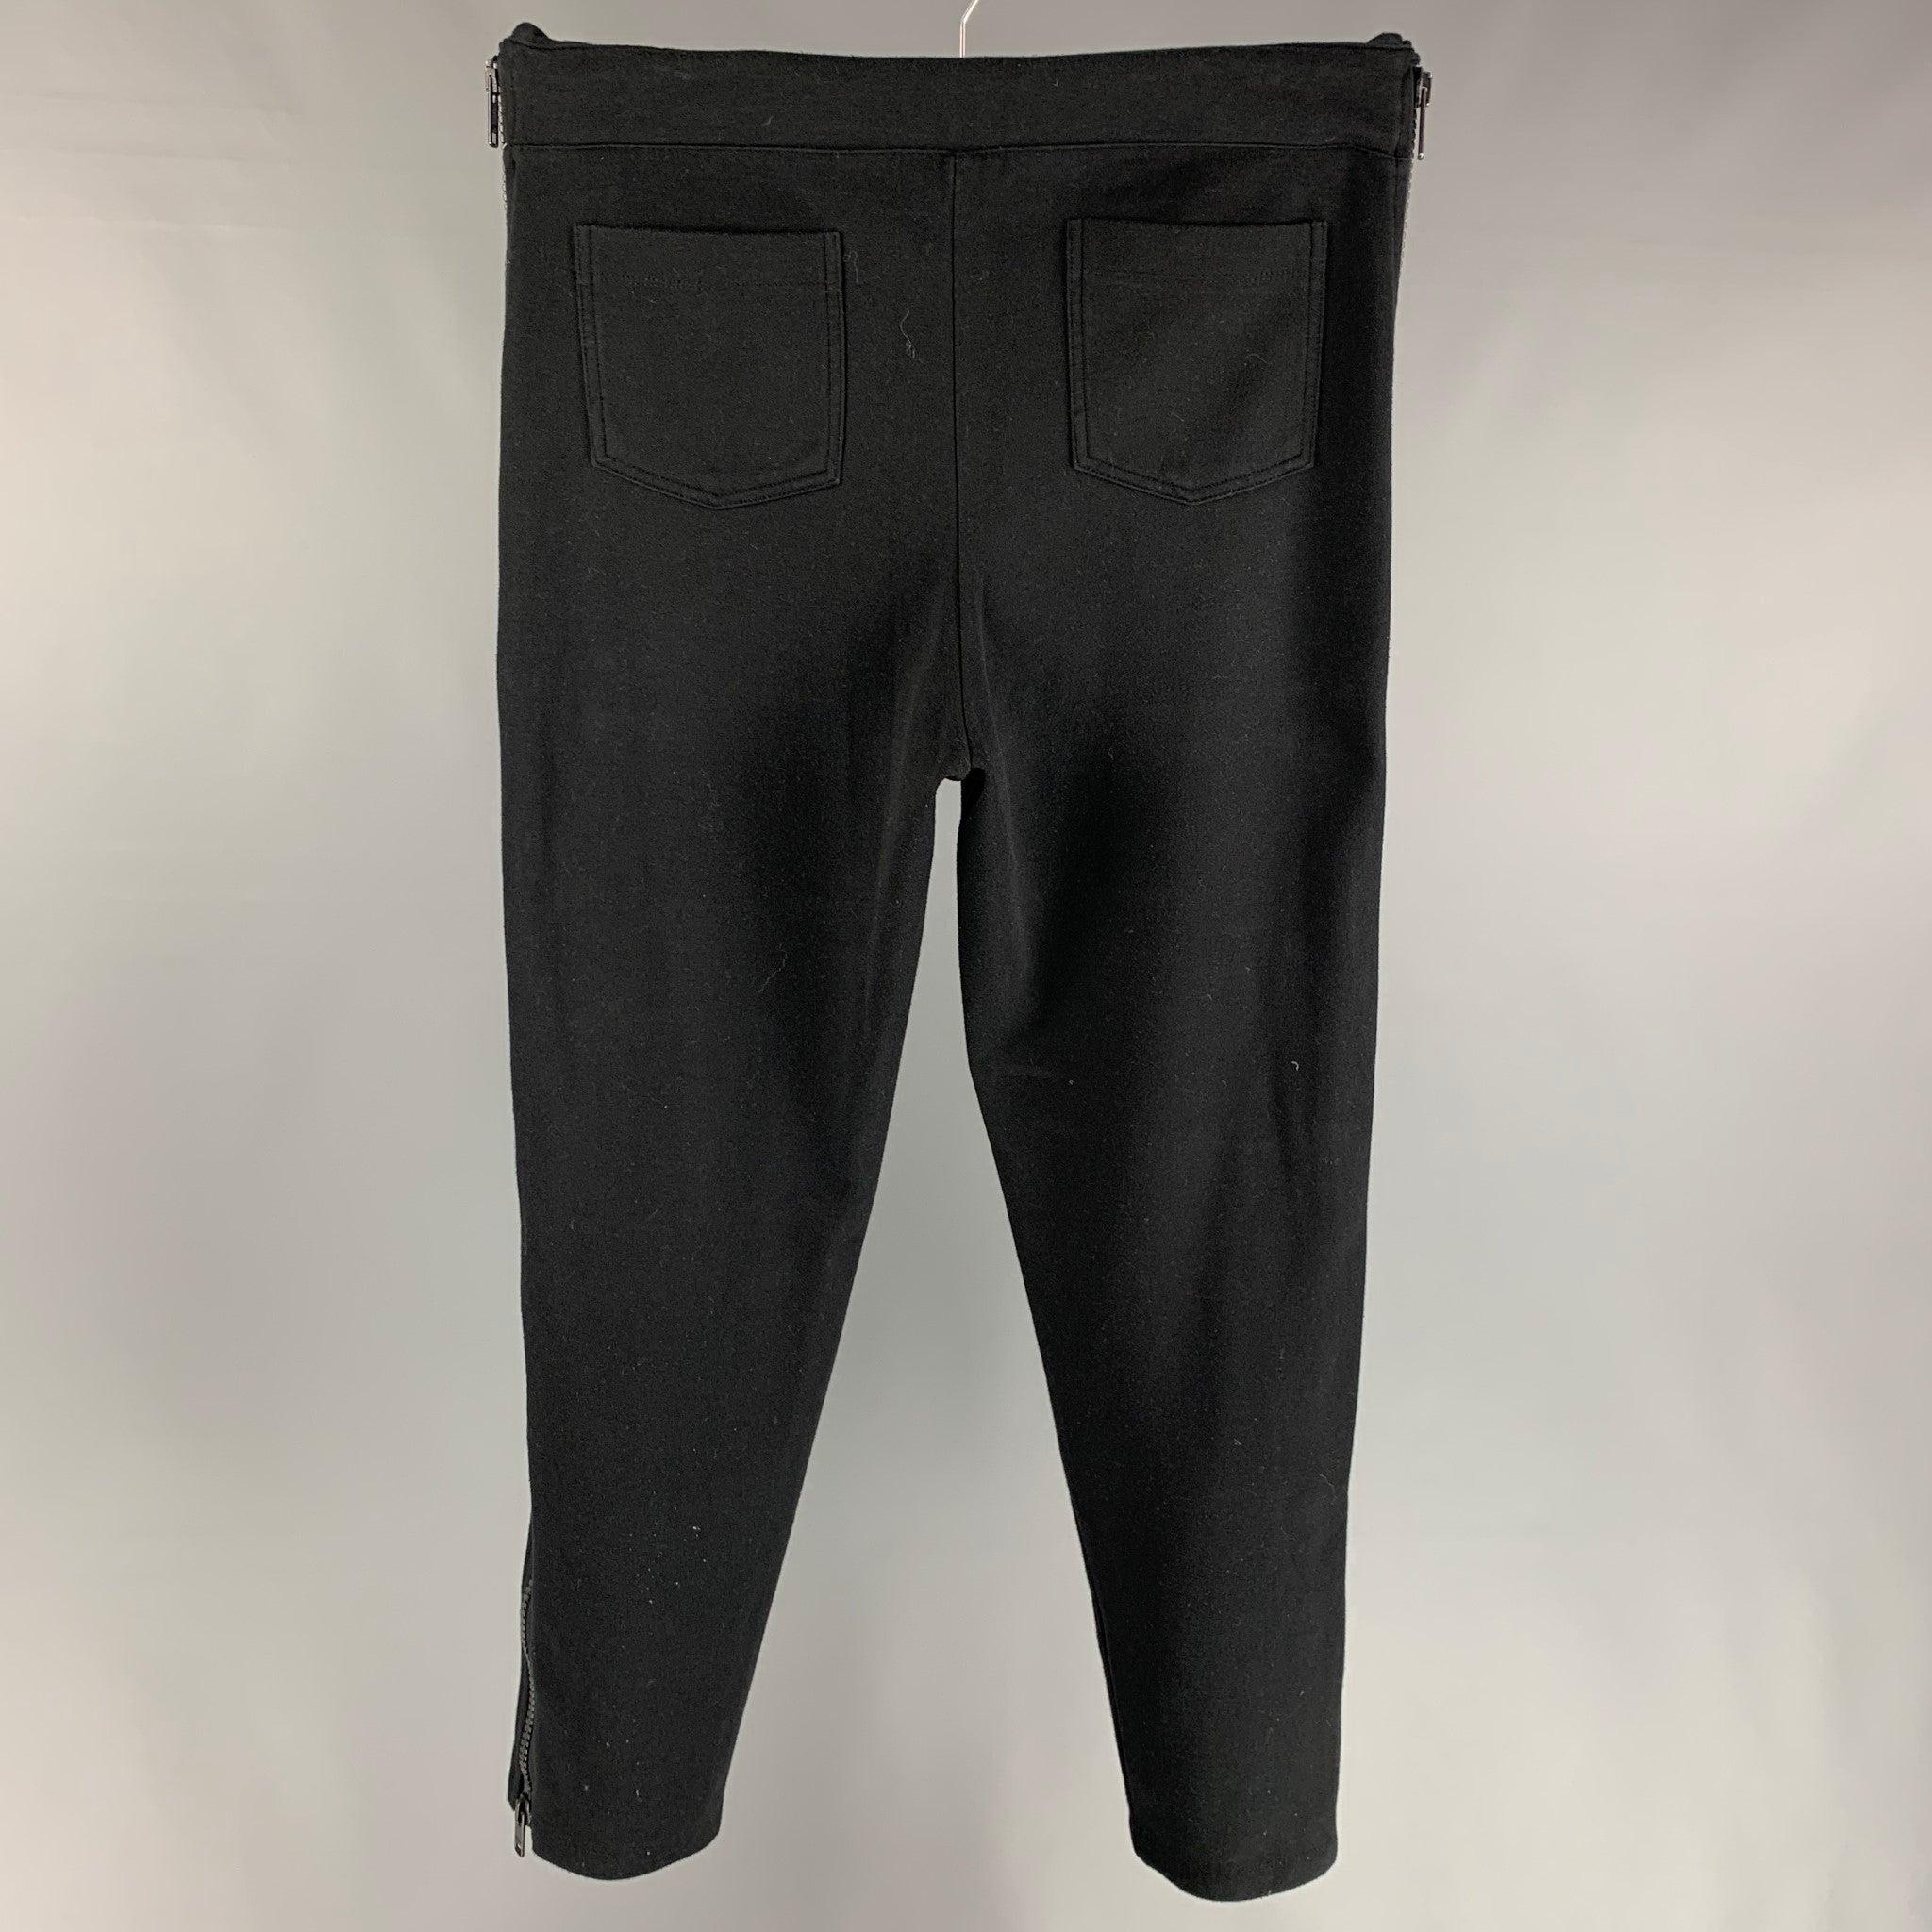 DRIES VAN NOTEN sweatpants comes in a black & white cotton / polyester featuring a slim fit, zipper details, and a drawstring.
Very Good
Pre-Owned Condition. 

Marked:   L  

Measurements: 
  Waist: 34 inches  Rise: 13 inches  Inseam: 30 inches 
  
